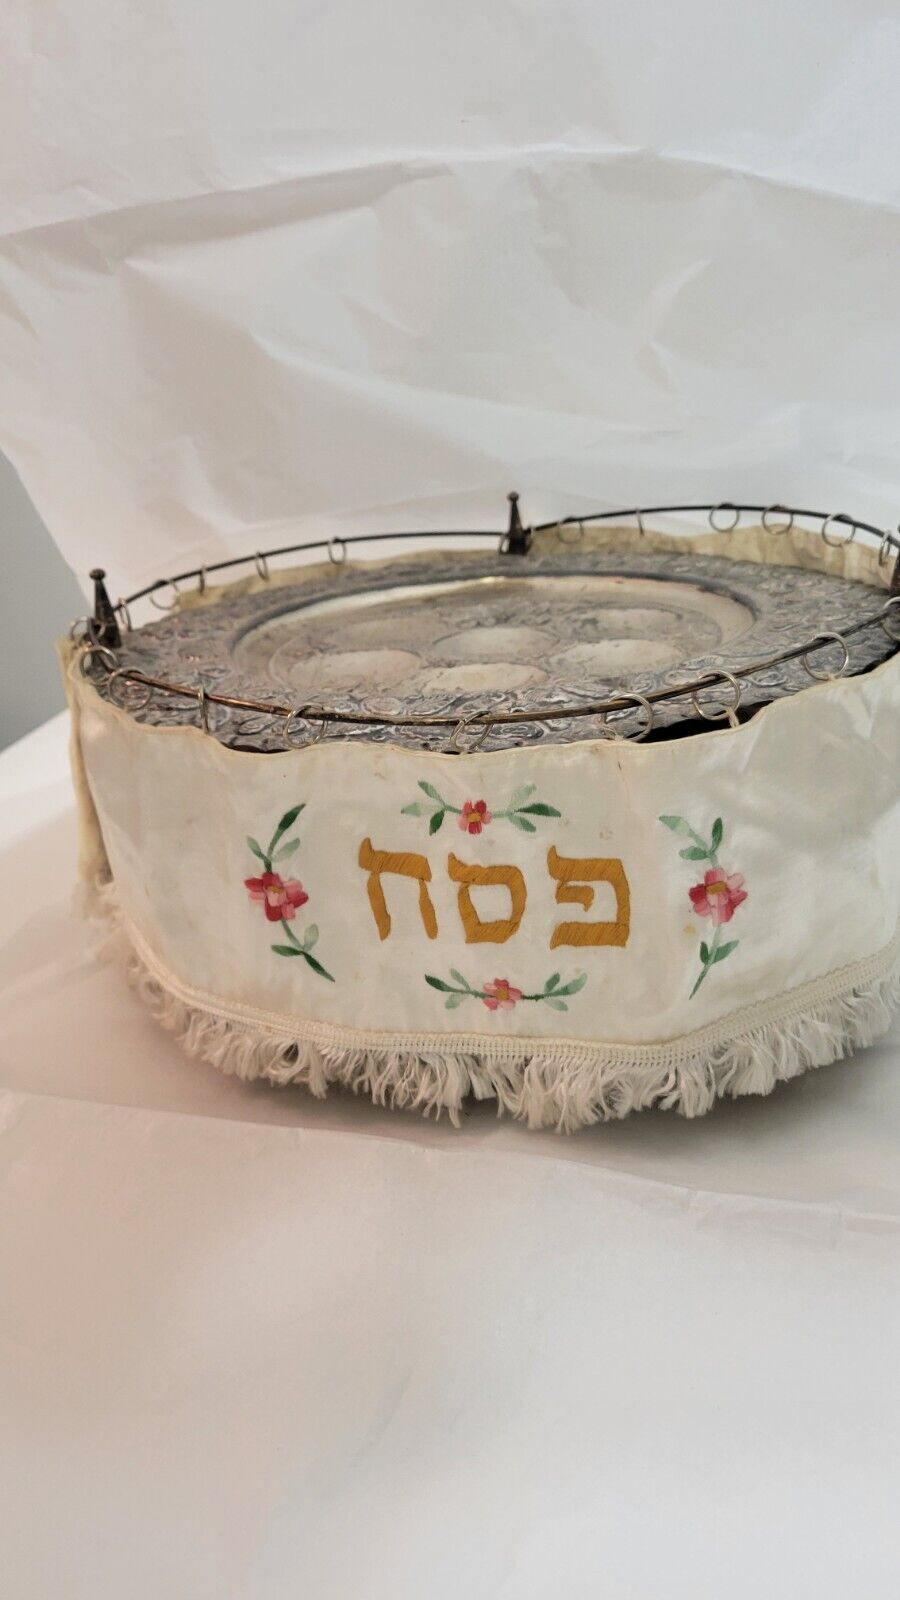 ANTIQUE STERLING SILVER JUDAICA PASSOVER SEDER PLATE